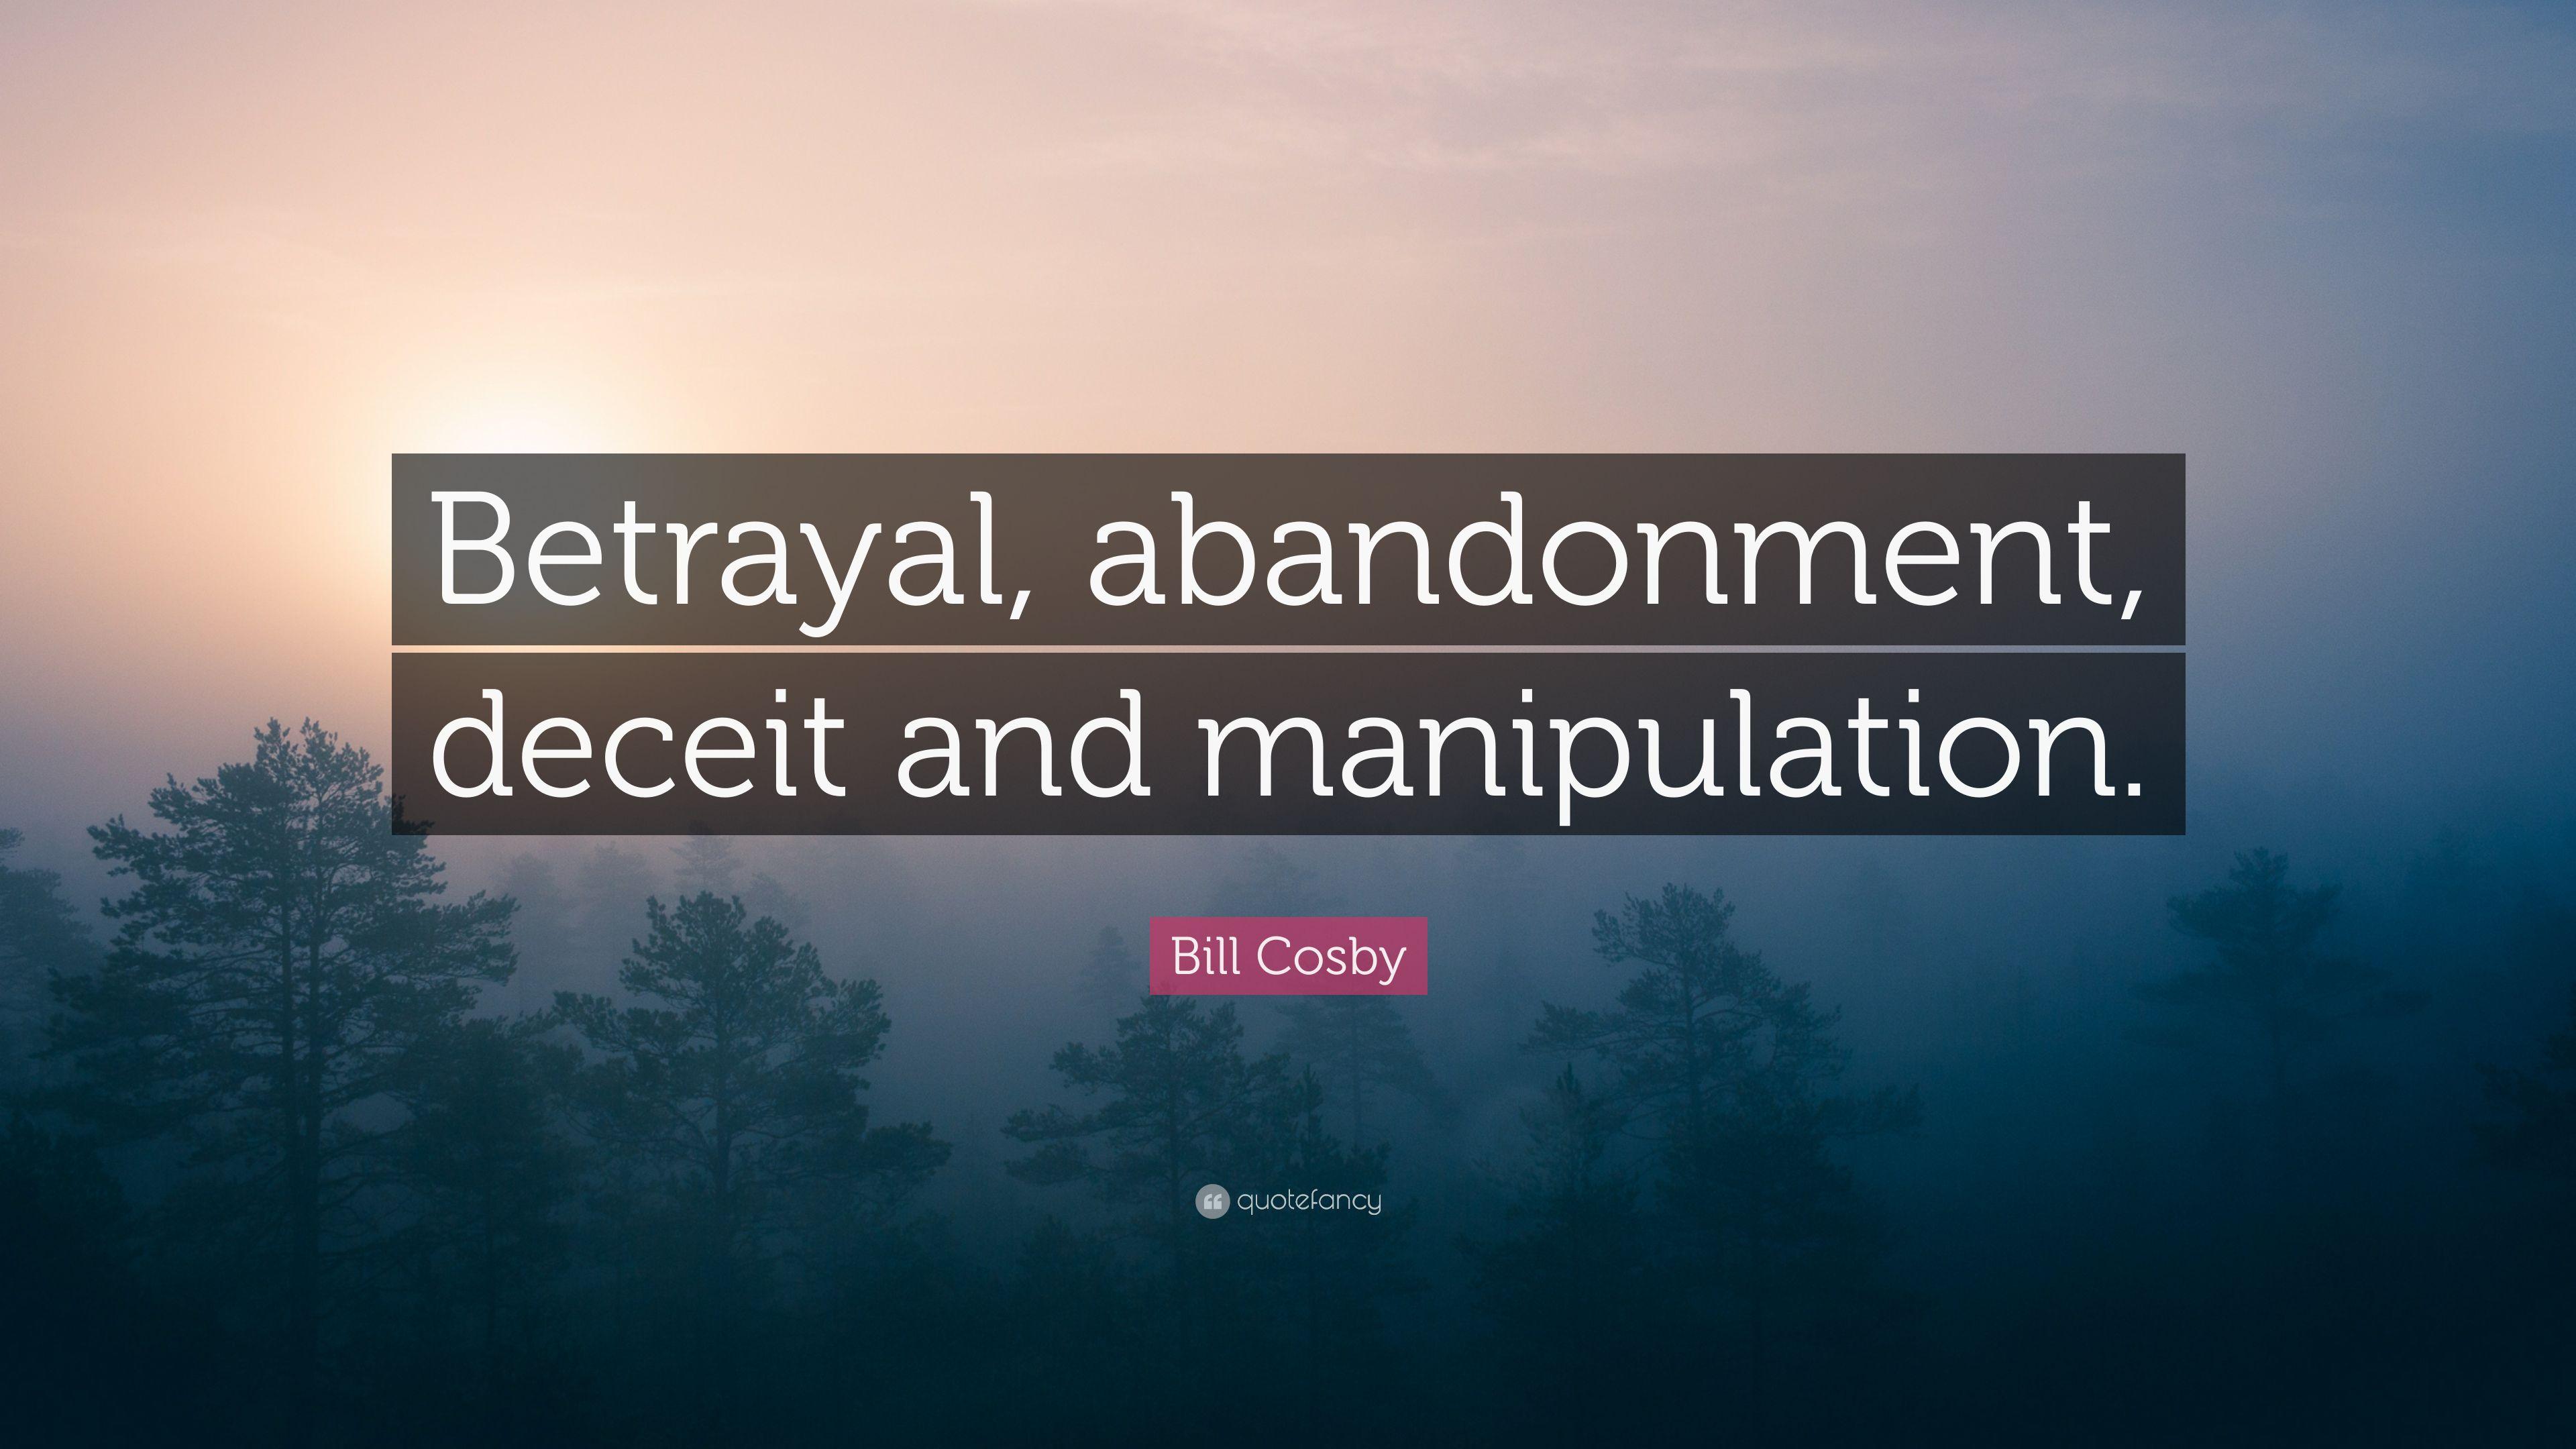 Bill Cosby Quote: “Betrayal, abandonment, deceit and manipulation